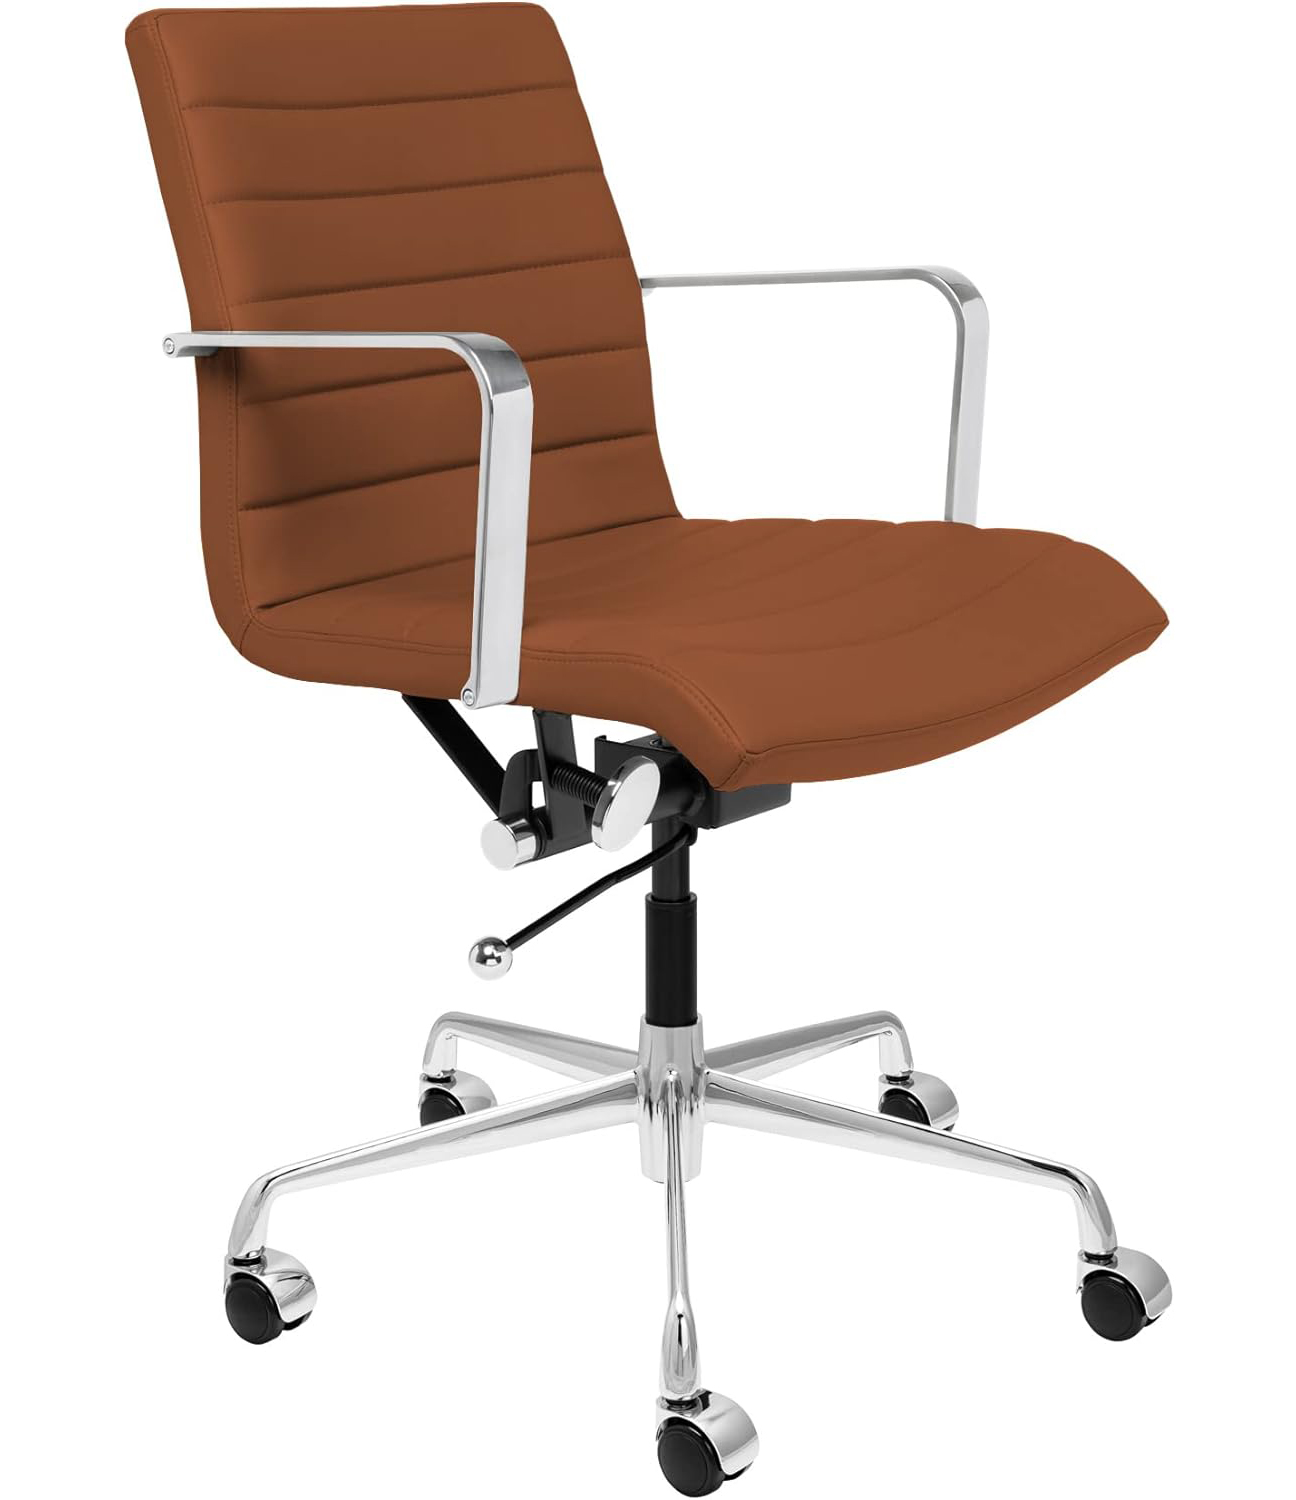 Laura Davidson Furniture SOHO II Ribbed Office Chair, Ergonomically Designed with Arm Rest & Swivel, Brown